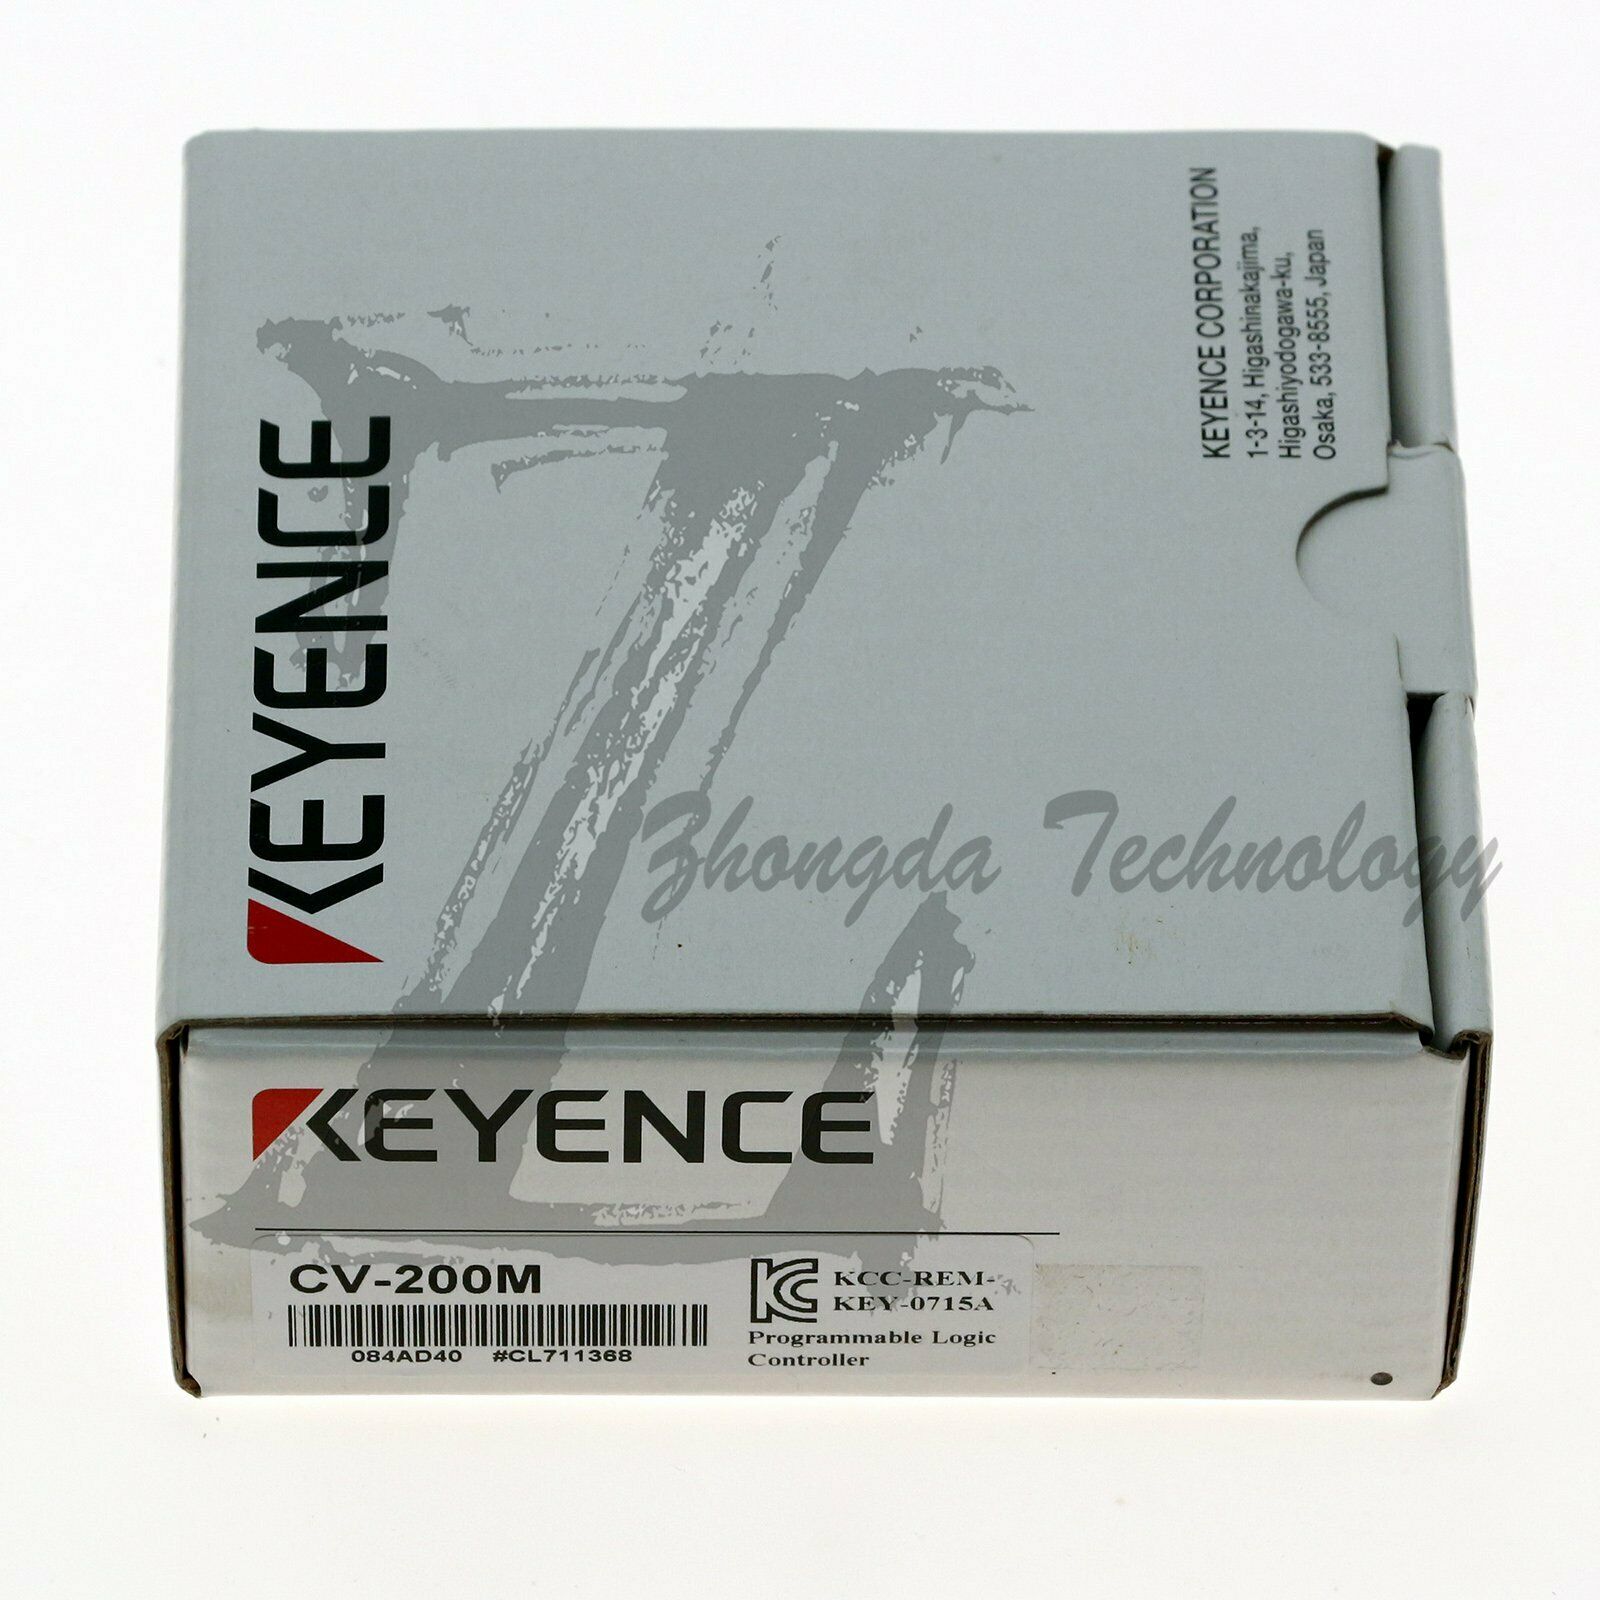 1PC Brand NEW IN BOX Keyence CV-200M  One year warranty KOEED 500+, 80%, import_2020_10_10_031751, KEYENCE, Other, validate-product-description